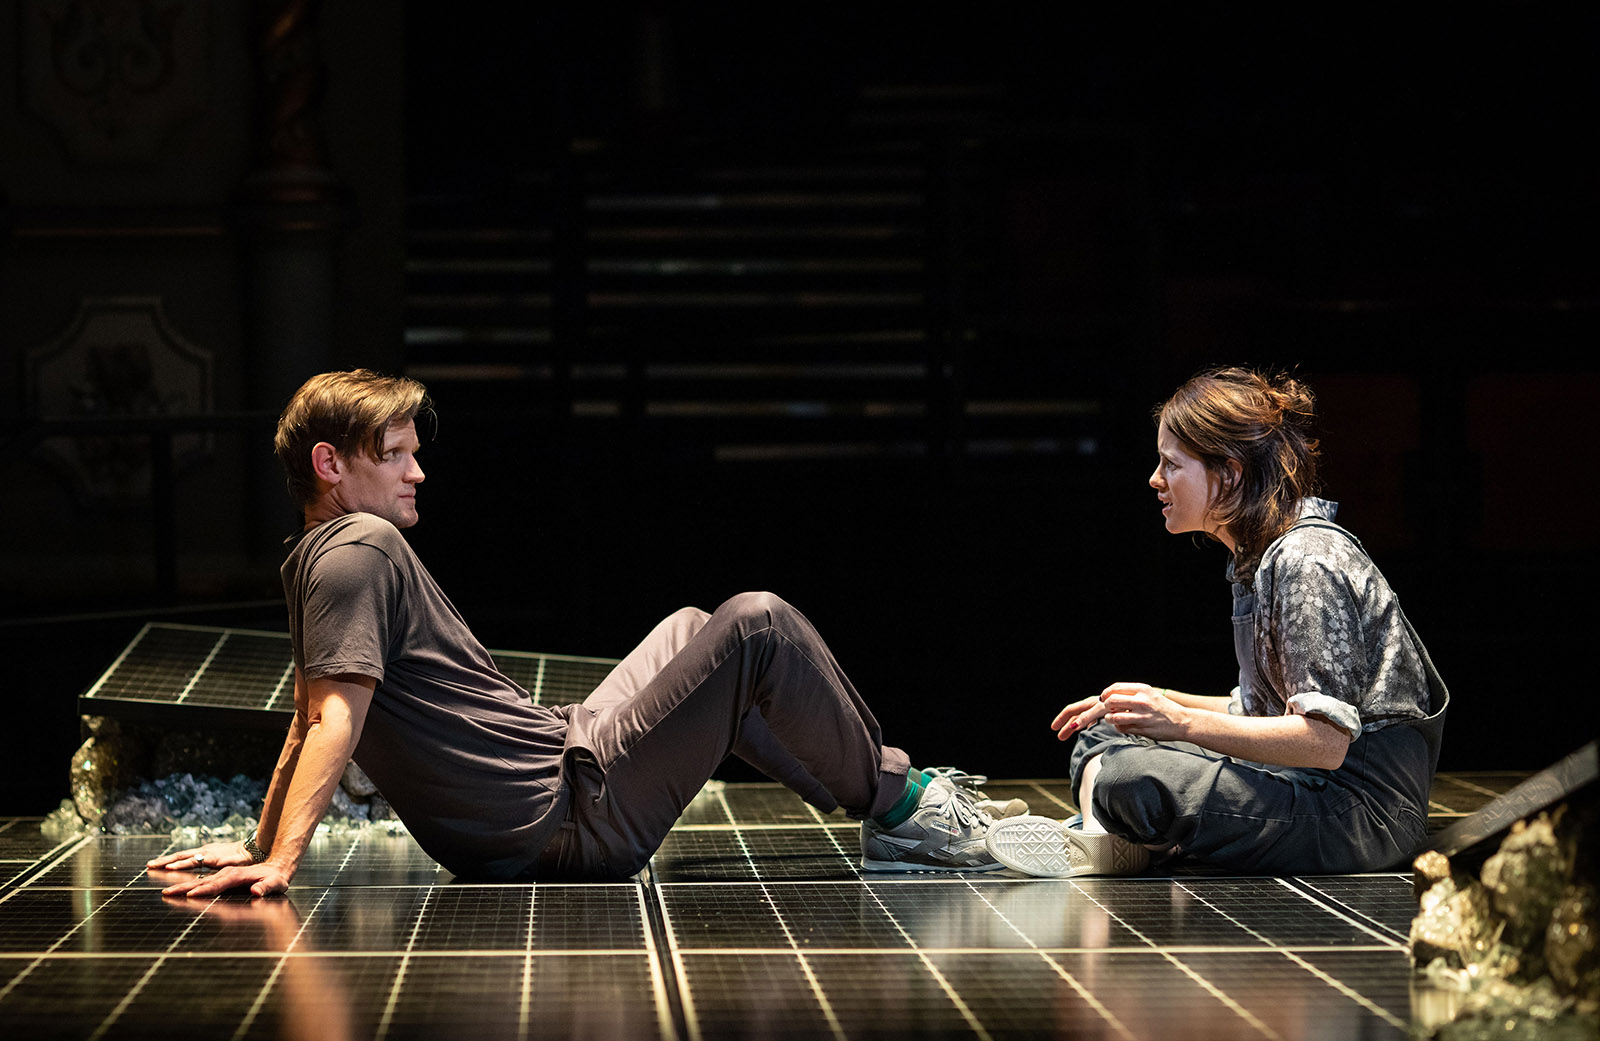 Matt Smith as M, and Claire Foy as W, in Lungs, directed by Matthew Warchus at the Old Vic Theatre, London, 2019